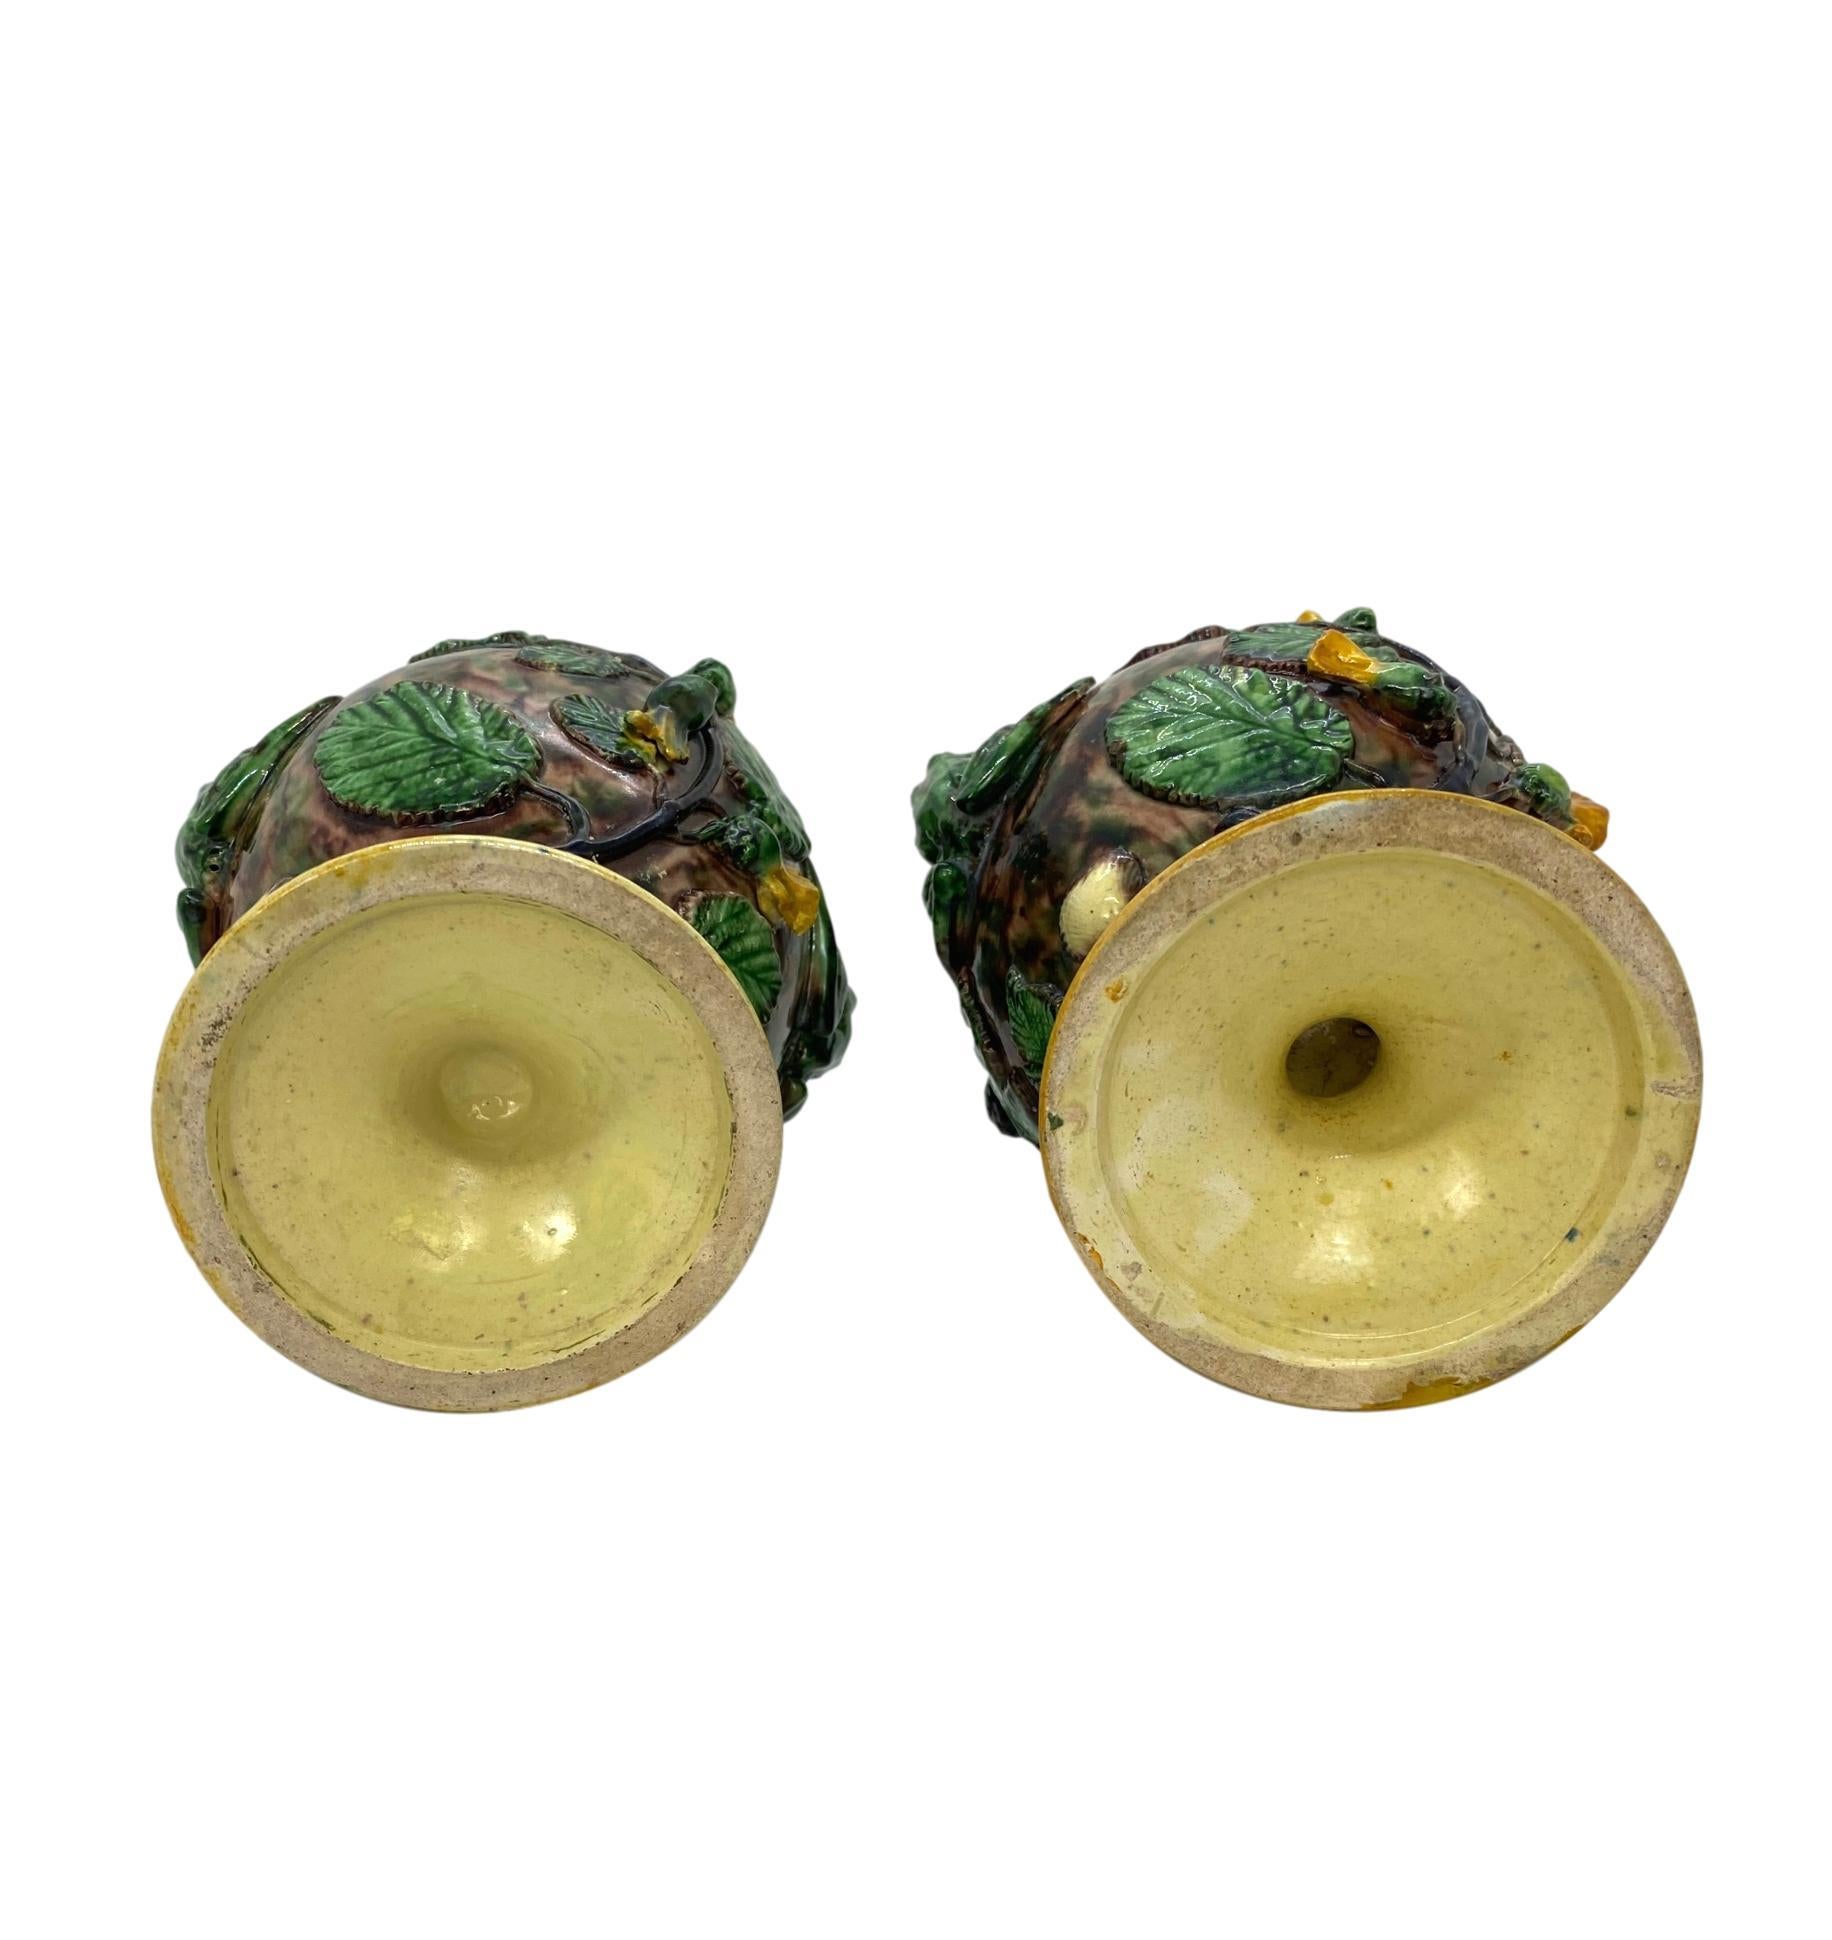 Pair of Majolica Palissy Ware Vases with Frogs, Thomas Sergent French circa 1885 8